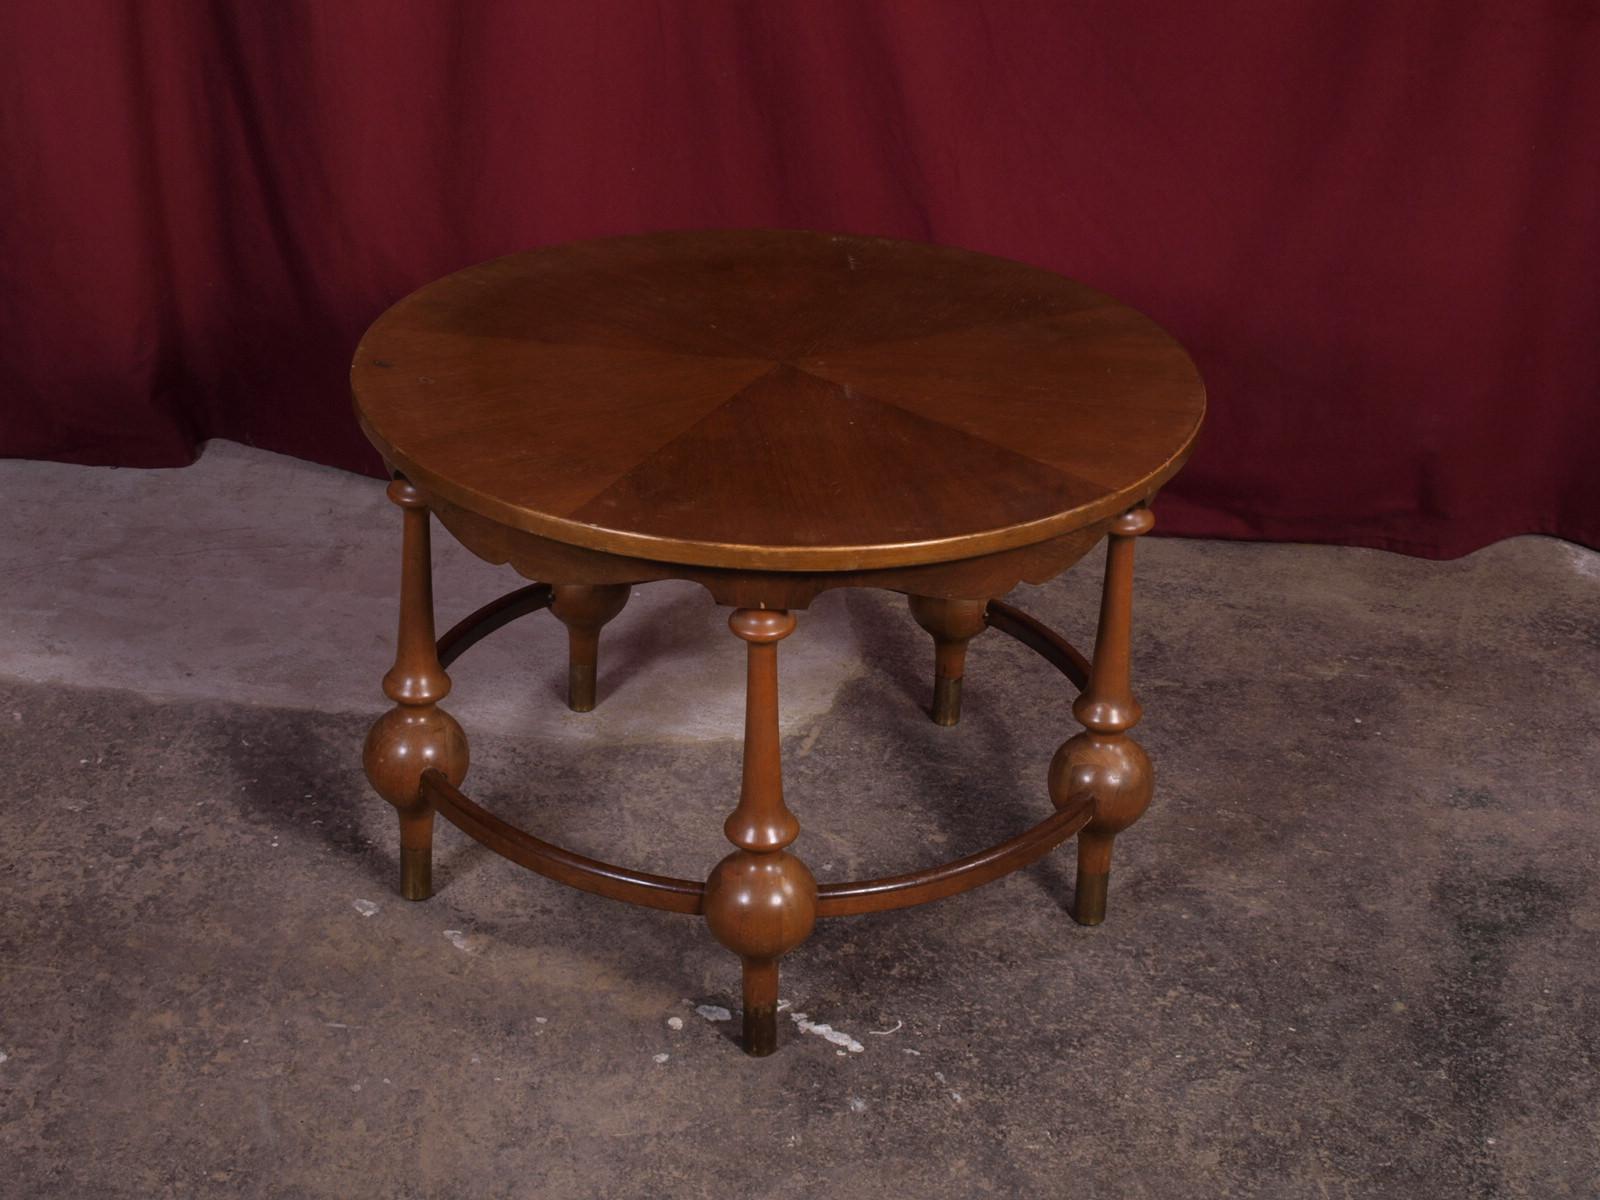 This vintage coffee table is a one-of-a-kind piece that will bring character and charm to your living room. The brass shoes, wooden globes, and handmade curves give it a unique and interesting design. It was made in the early to mid-20th century and